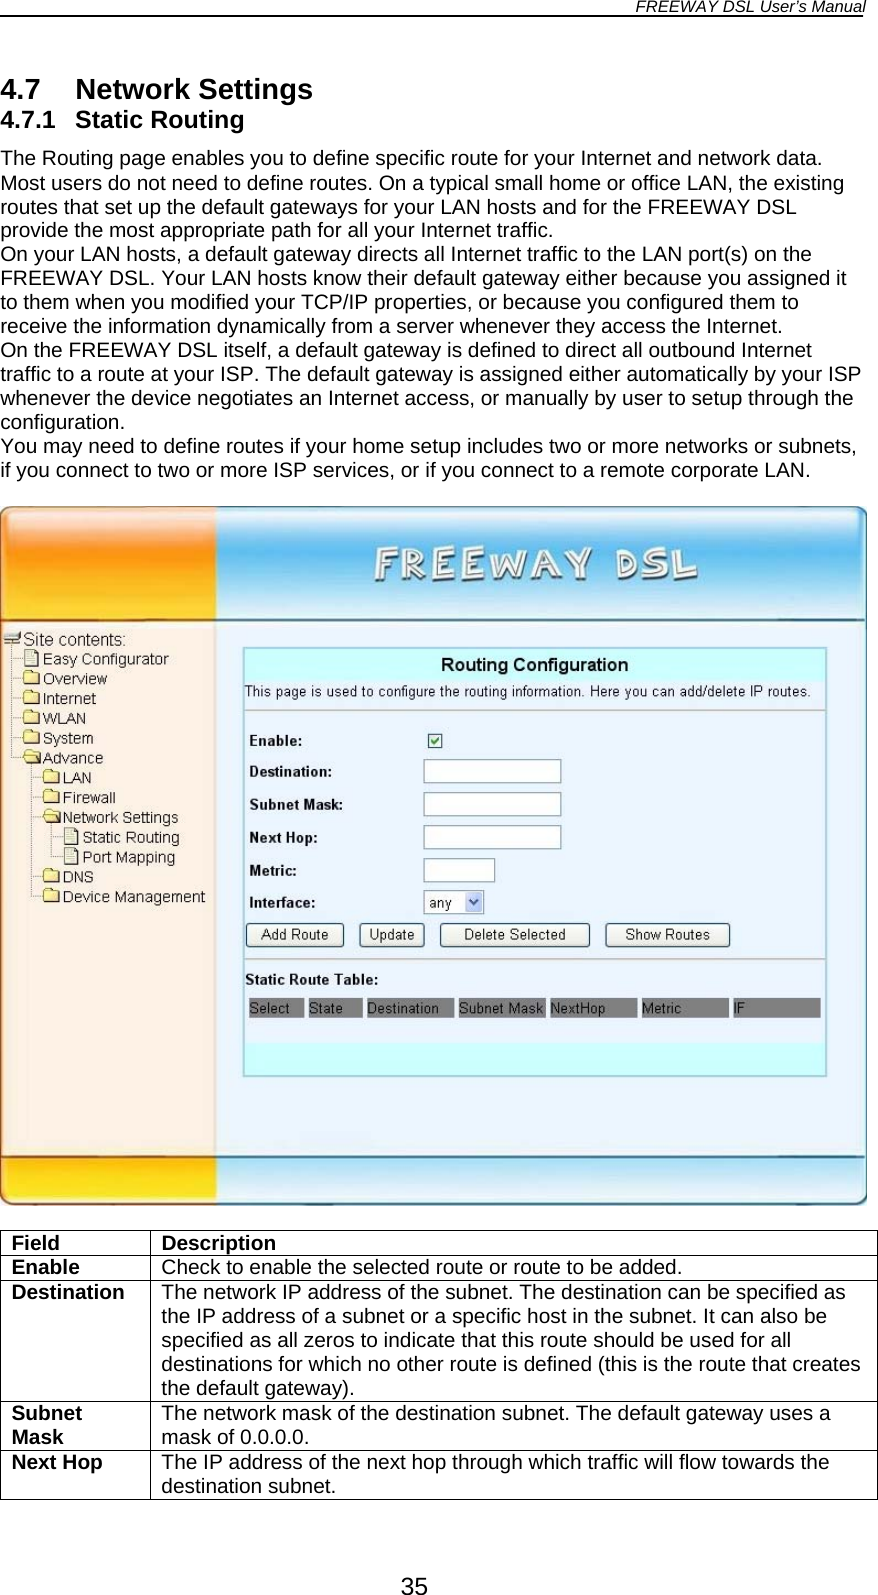 FREEWAY DSL User’s Manual  4.7 Network Settings 4.7.1 Static Routing The Routing page enables you to define specific route for your Internet and network data. Most users do not need to define routes. On a typical small home or office LAN, the existing routes that set up the default gateways for your LAN hosts and for the FREEWAY DSL provide the most appropriate path for all your Internet traffic. On your LAN hosts, a default gateway directs all Internet traffic to the LAN port(s) on the FREEWAY DSL. Your LAN hosts know their default gateway either because you assigned it to them when you modified your TCP/IP properties, or because you configured them to receive the information dynamically from a server whenever they access the Internet. On the FREEWAY DSL itself, a default gateway is defined to direct all outbound Internet traffic to a route at your ISP. The default gateway is assigned either automatically by your ISP whenever the device negotiates an Internet access, or manually by user to setup through the configuration. You may need to define routes if your home setup includes two or more networks or subnets, if you connect to two or more ISP services, or if you connect to a remote corporate LAN.    Field Description Enable  Check to enable the selected route or route to be added. Destination  The network IP address of the subnet. The destination can be specified as the IP address of a subnet or a specific host in the subnet. It can also be specified as all zeros to indicate that this route should be used for all destinations for which no other route is defined (this is the route that creates the default gateway). Subnet Mask  The network mask of the destination subnet. The default gateway uses a mask of 0.0.0.0. Next Hop  The IP address of the next hop through which traffic will flow towards the destination subnet. 35 